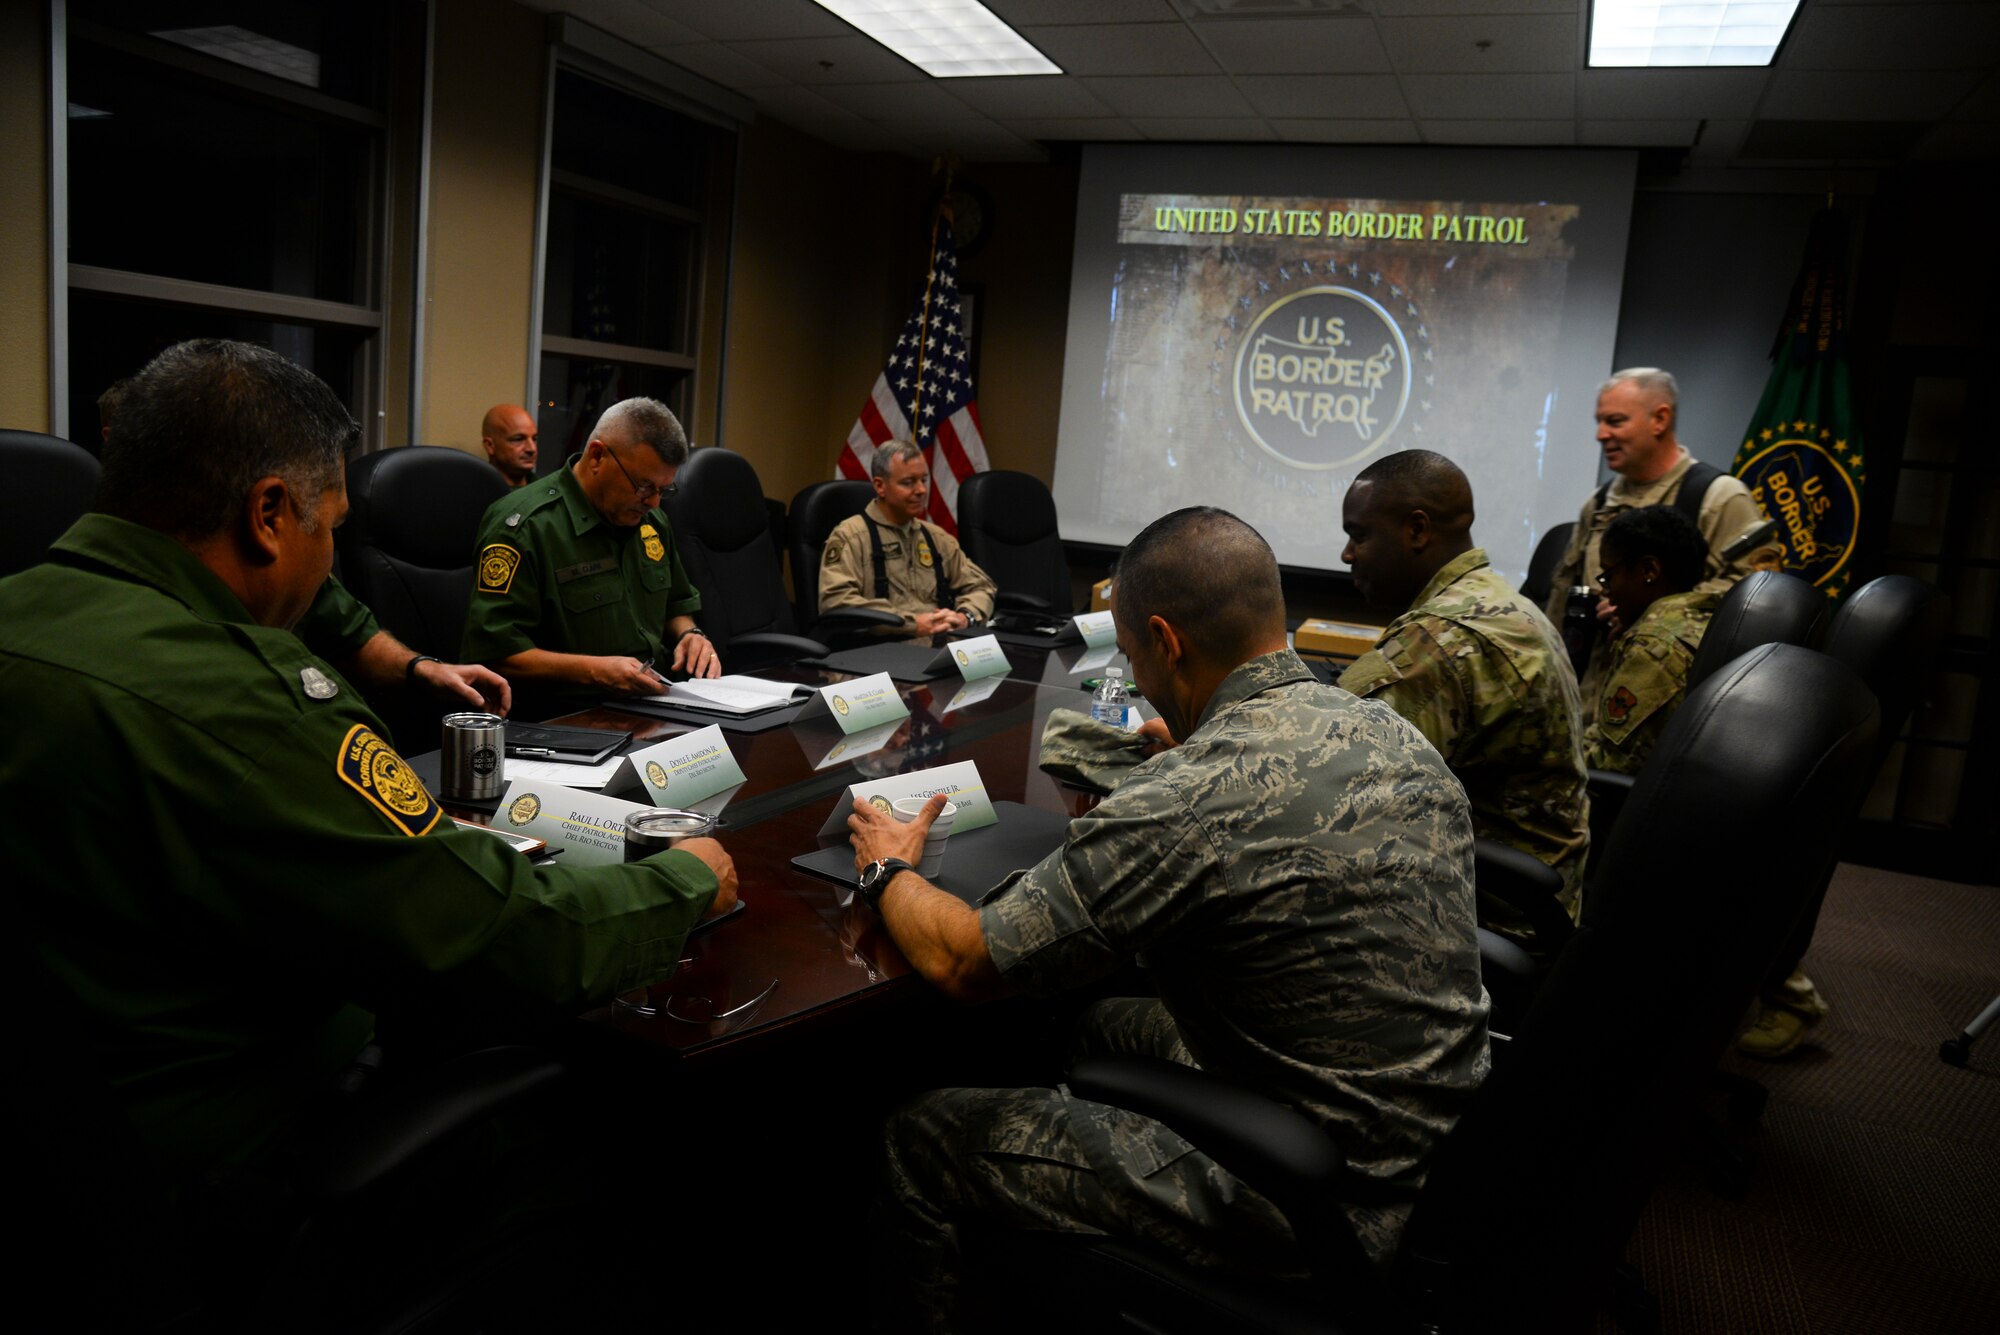 Col. Lee Gentile, 47th Flying Training Wing commander, and Command Chief Robert Zackery III, 47th FTW command chief, are briefed by Del Rio Border Patrol Sector officals Oct. 4, 2019, in Del Rio, Texas. Laughlin leadeship was invited on tour with Del Rio Border Patrol Sector to get a firsthand look at Border Patrol operations as well as strengthening community bonds. (U.S. Air Force photo by Senior Airman Marco A. Gomez)